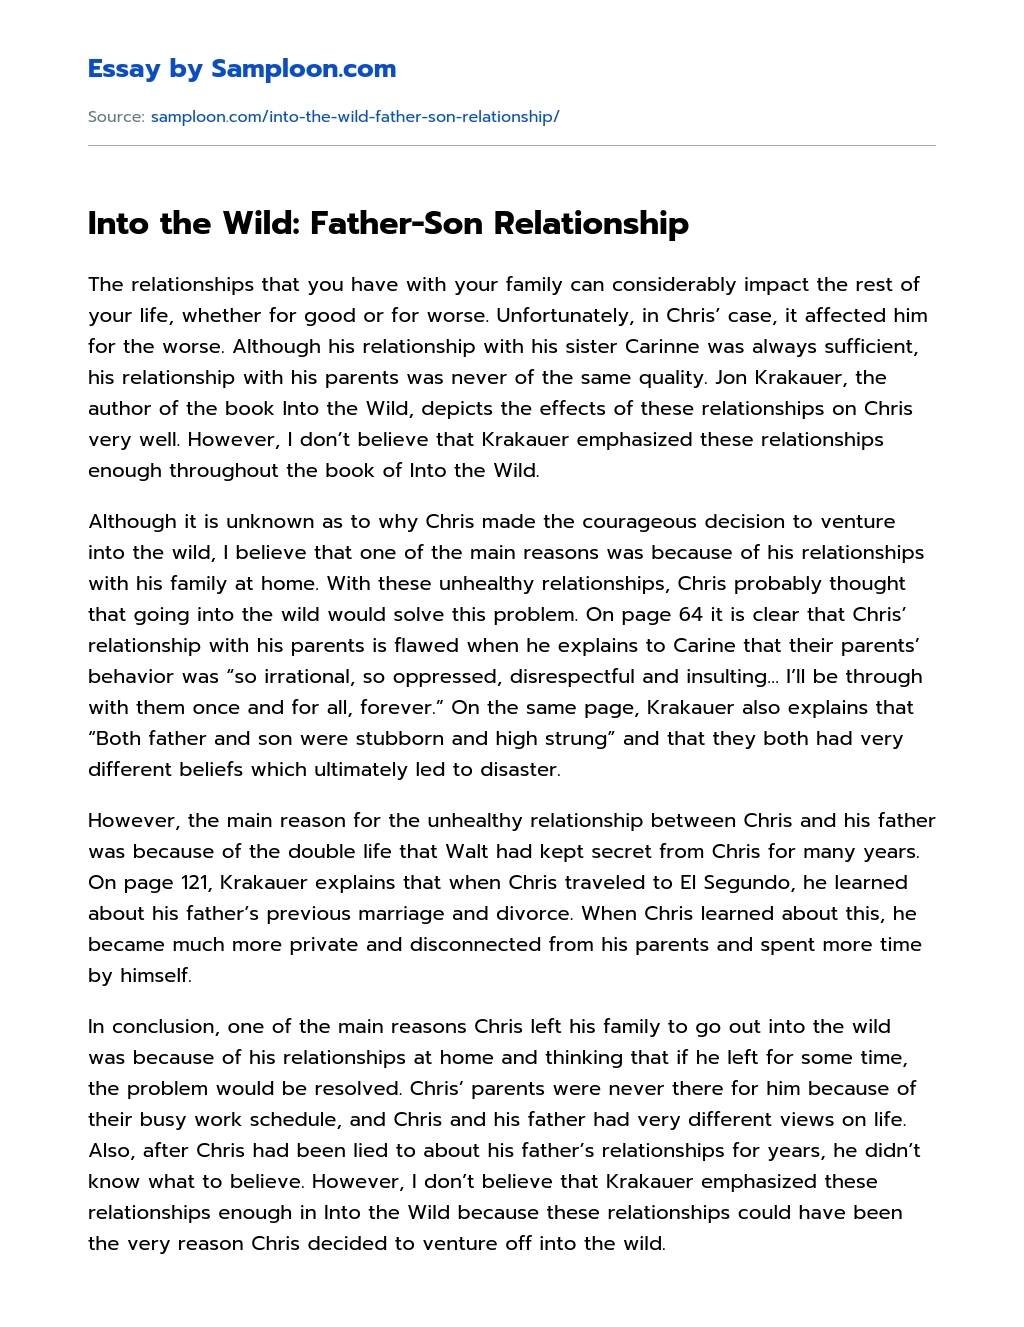 Into the Wild: Father-Son Relationship Analytical Essay essay